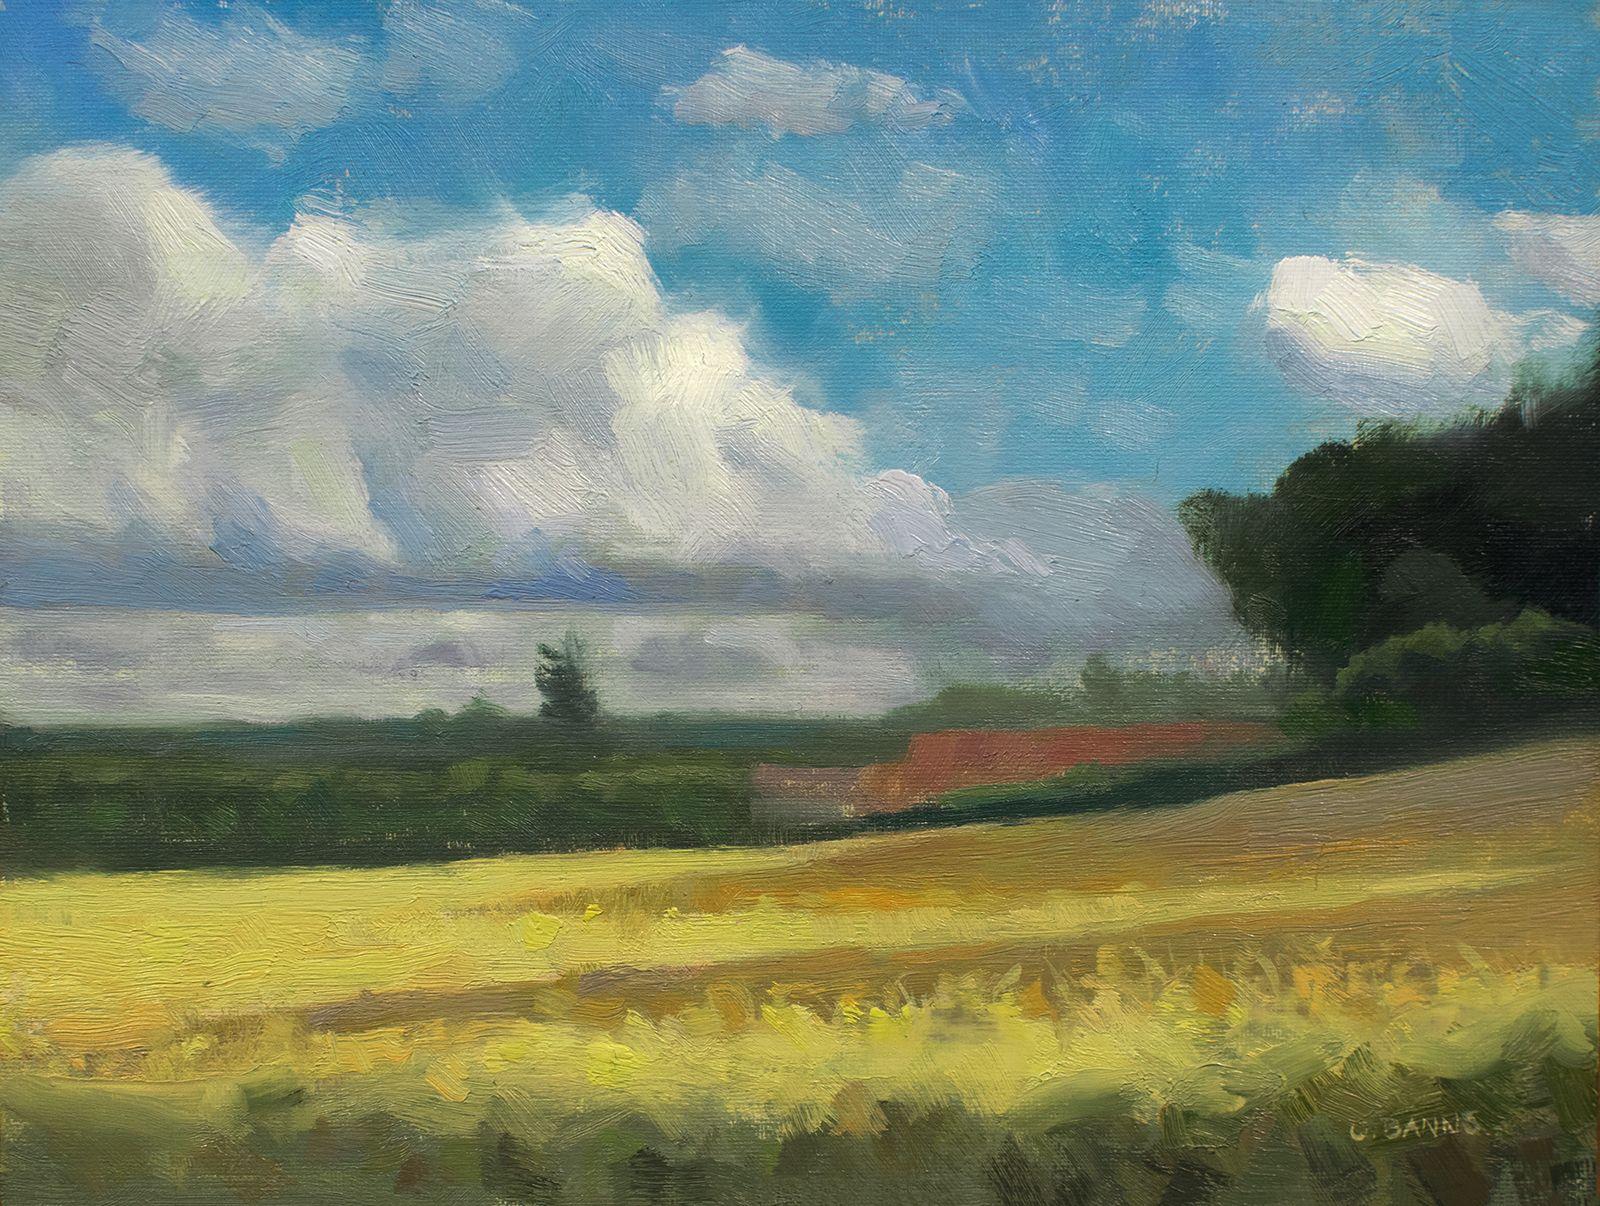 By the river, at the edge of my local town is a small studio that belonged to the artist Jean-Baptiste-Camille Corot. He would take some of his summers to come to this remote spot in the West of France to paint.  Just across from it were these wheat